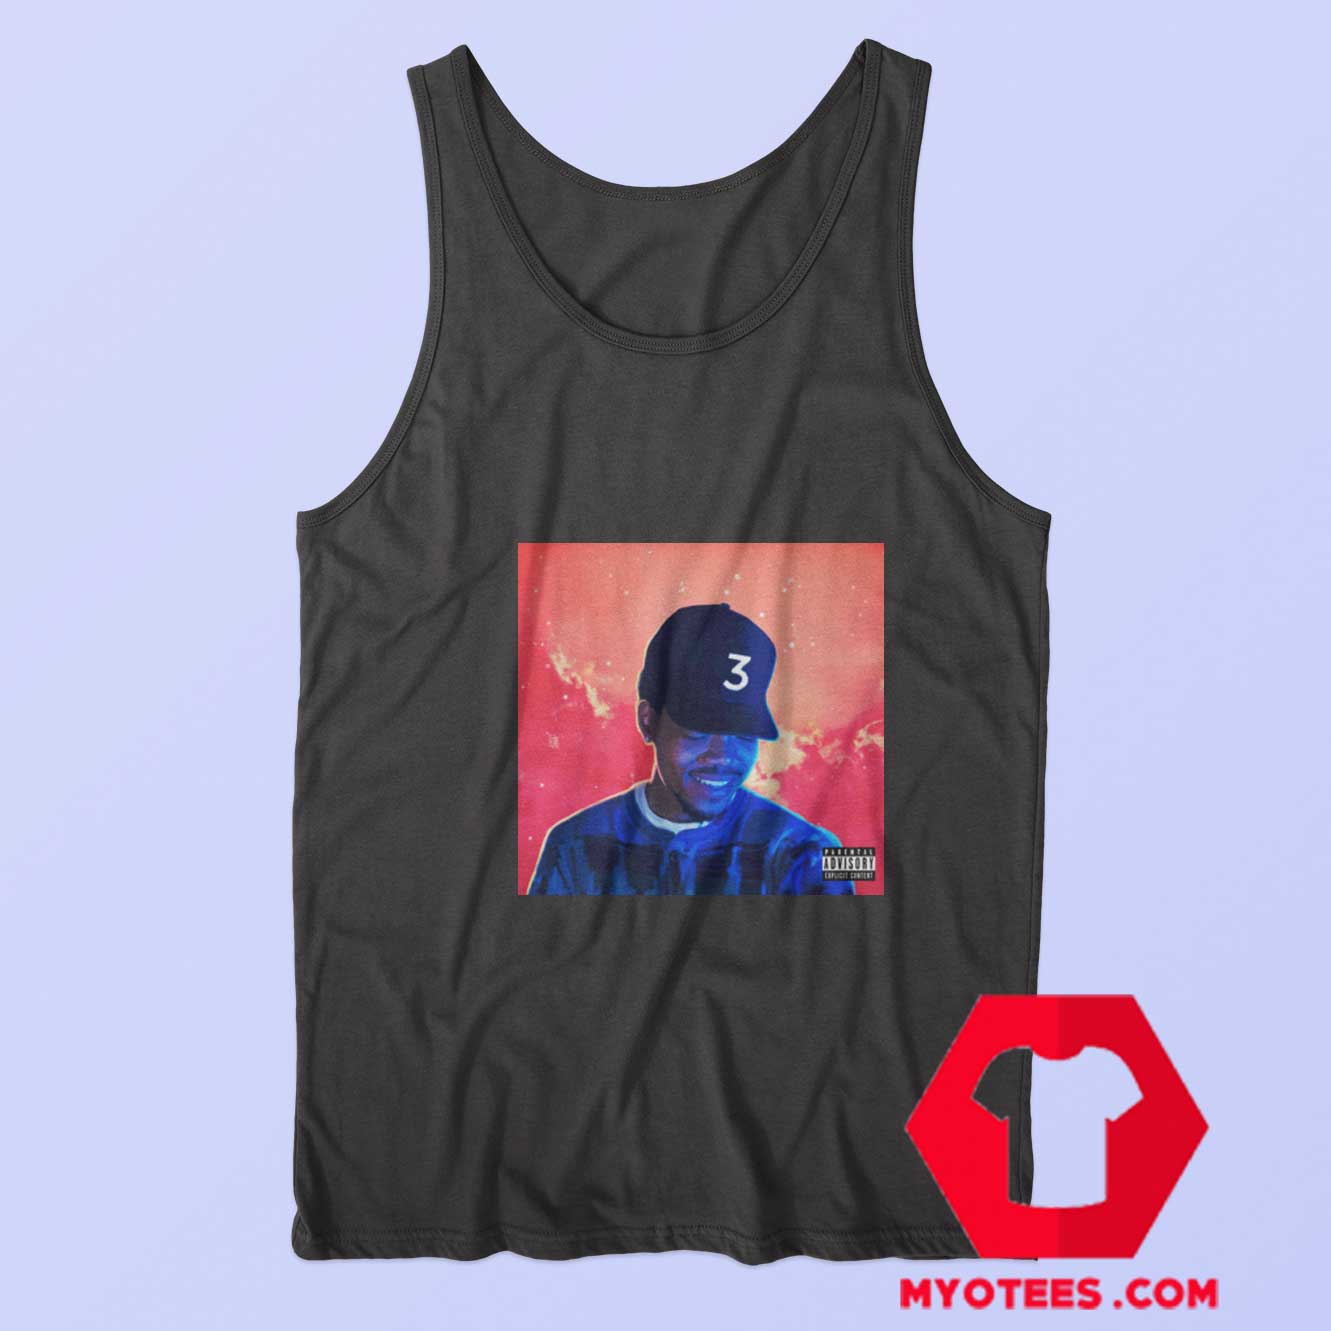 Download Chance The Rapper Coloring Book Album Tank Top Myotees